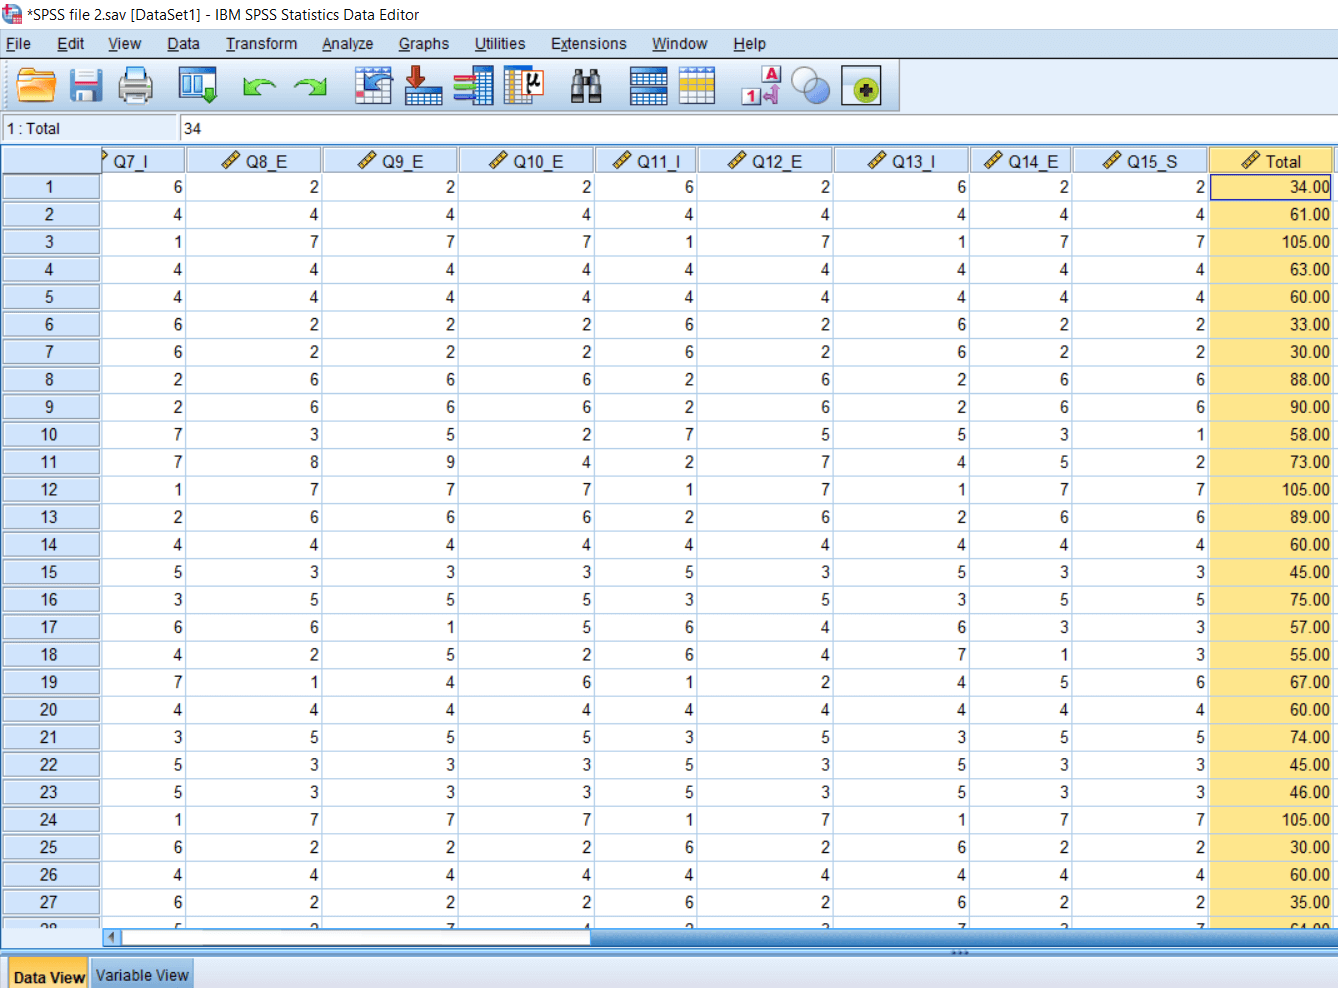 Recode into Same Variable in SPSS